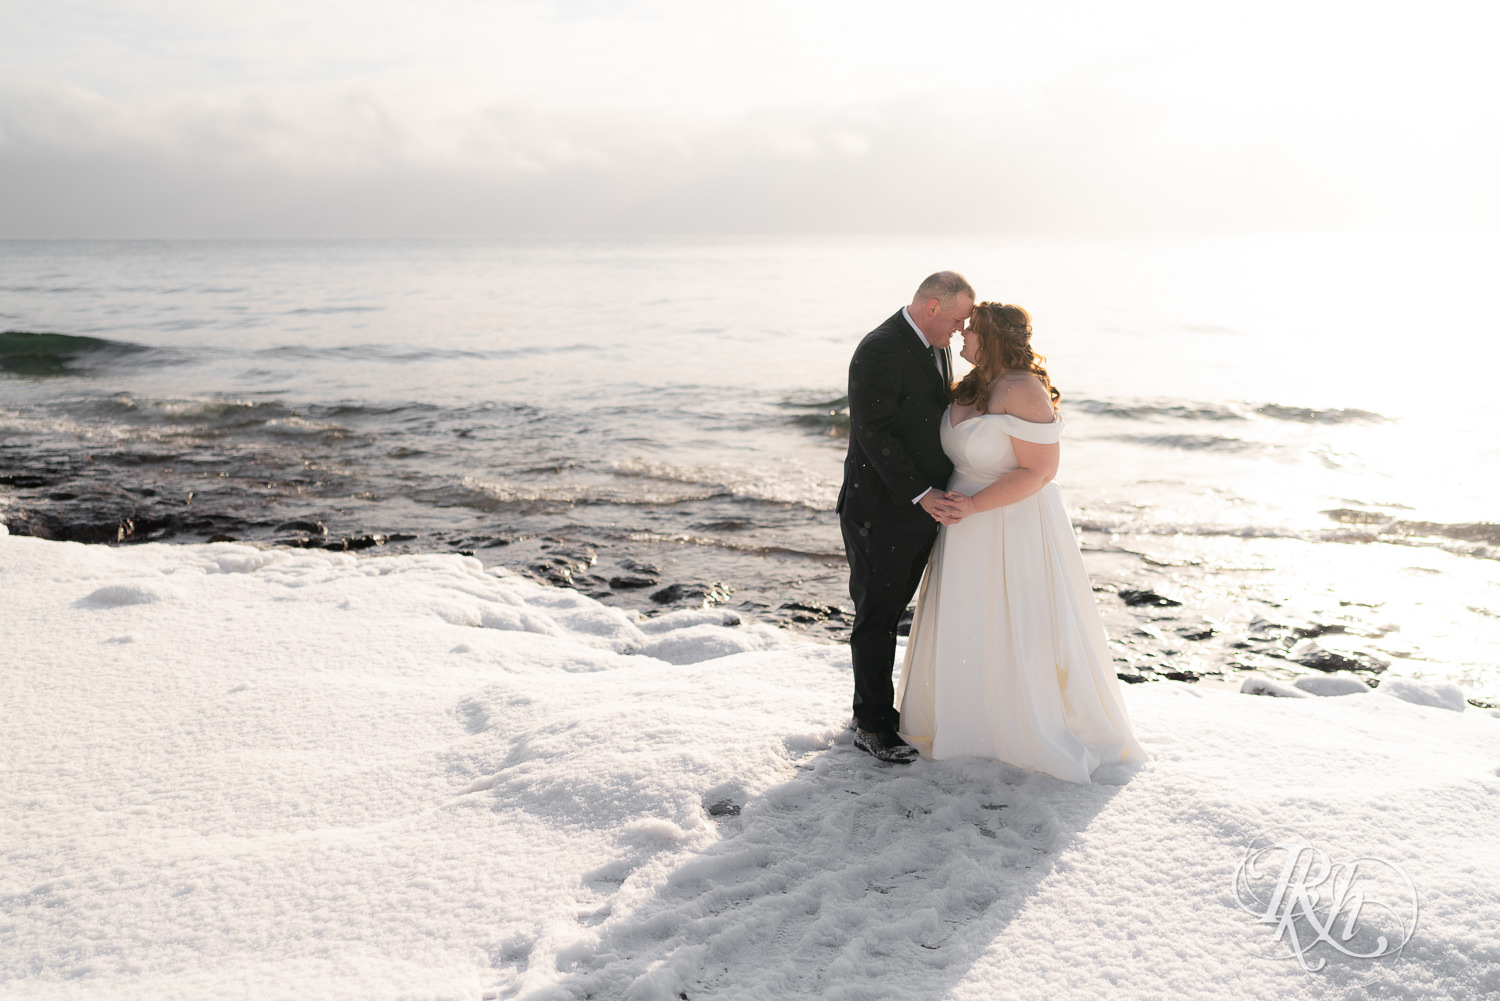 Bride and groom kissing in the snow in front of Lake Superior at Grand Superior Lodge in Two Harbors, Minnesota.